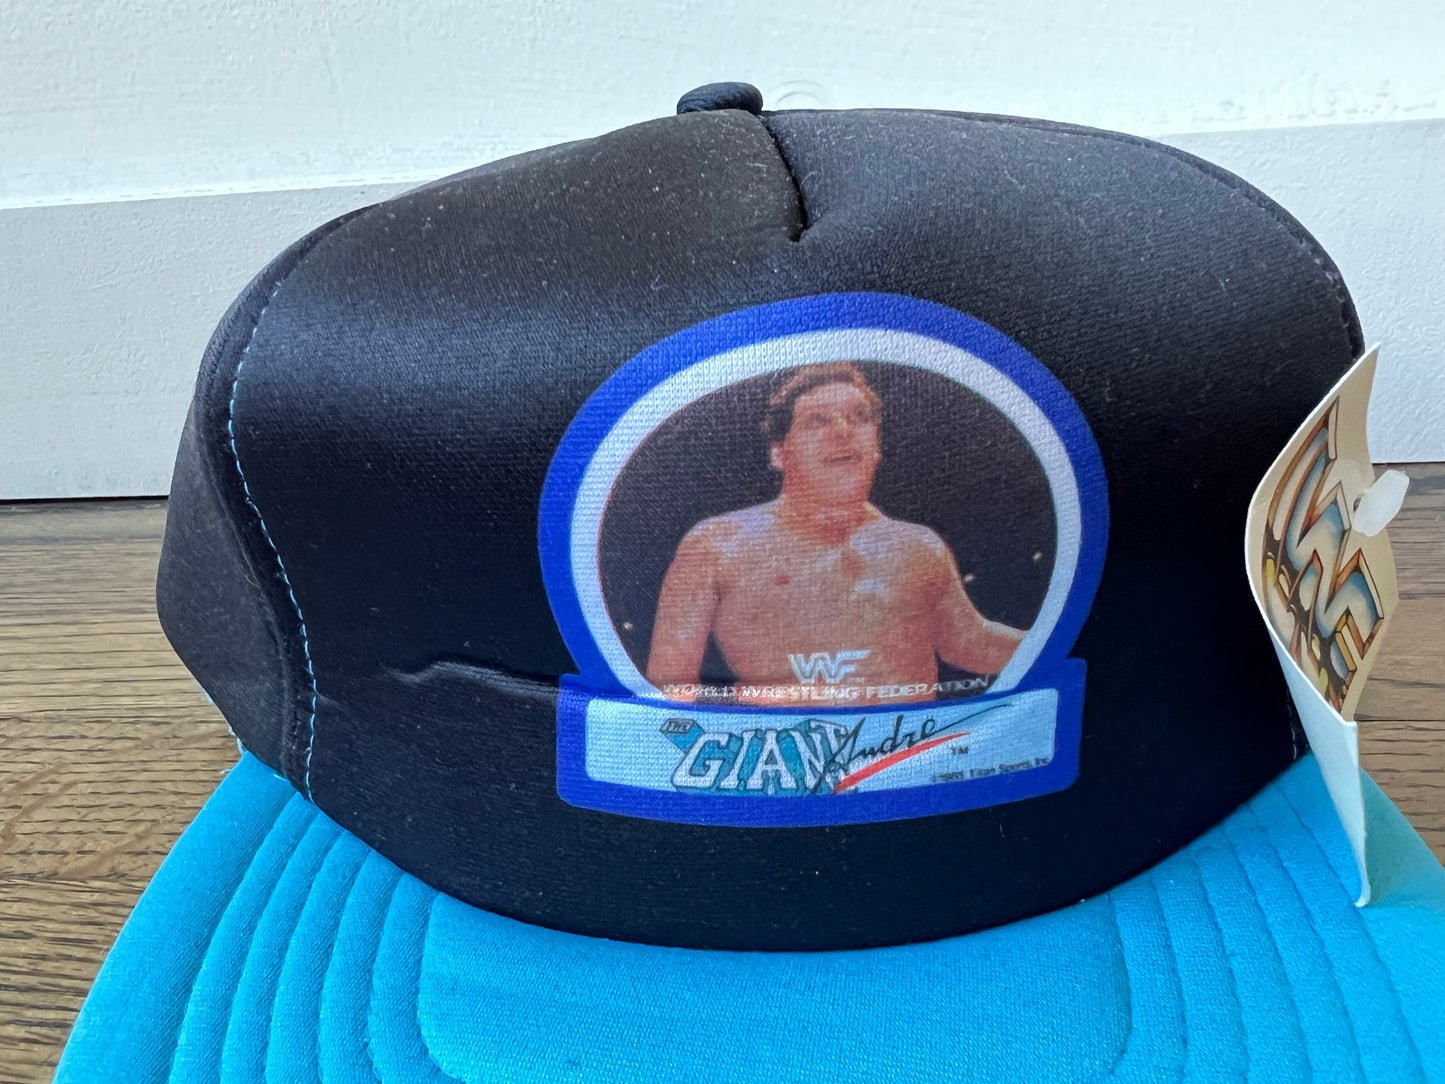 1985 WWF Andre the Giant SnapBack tracker hat with original Tag